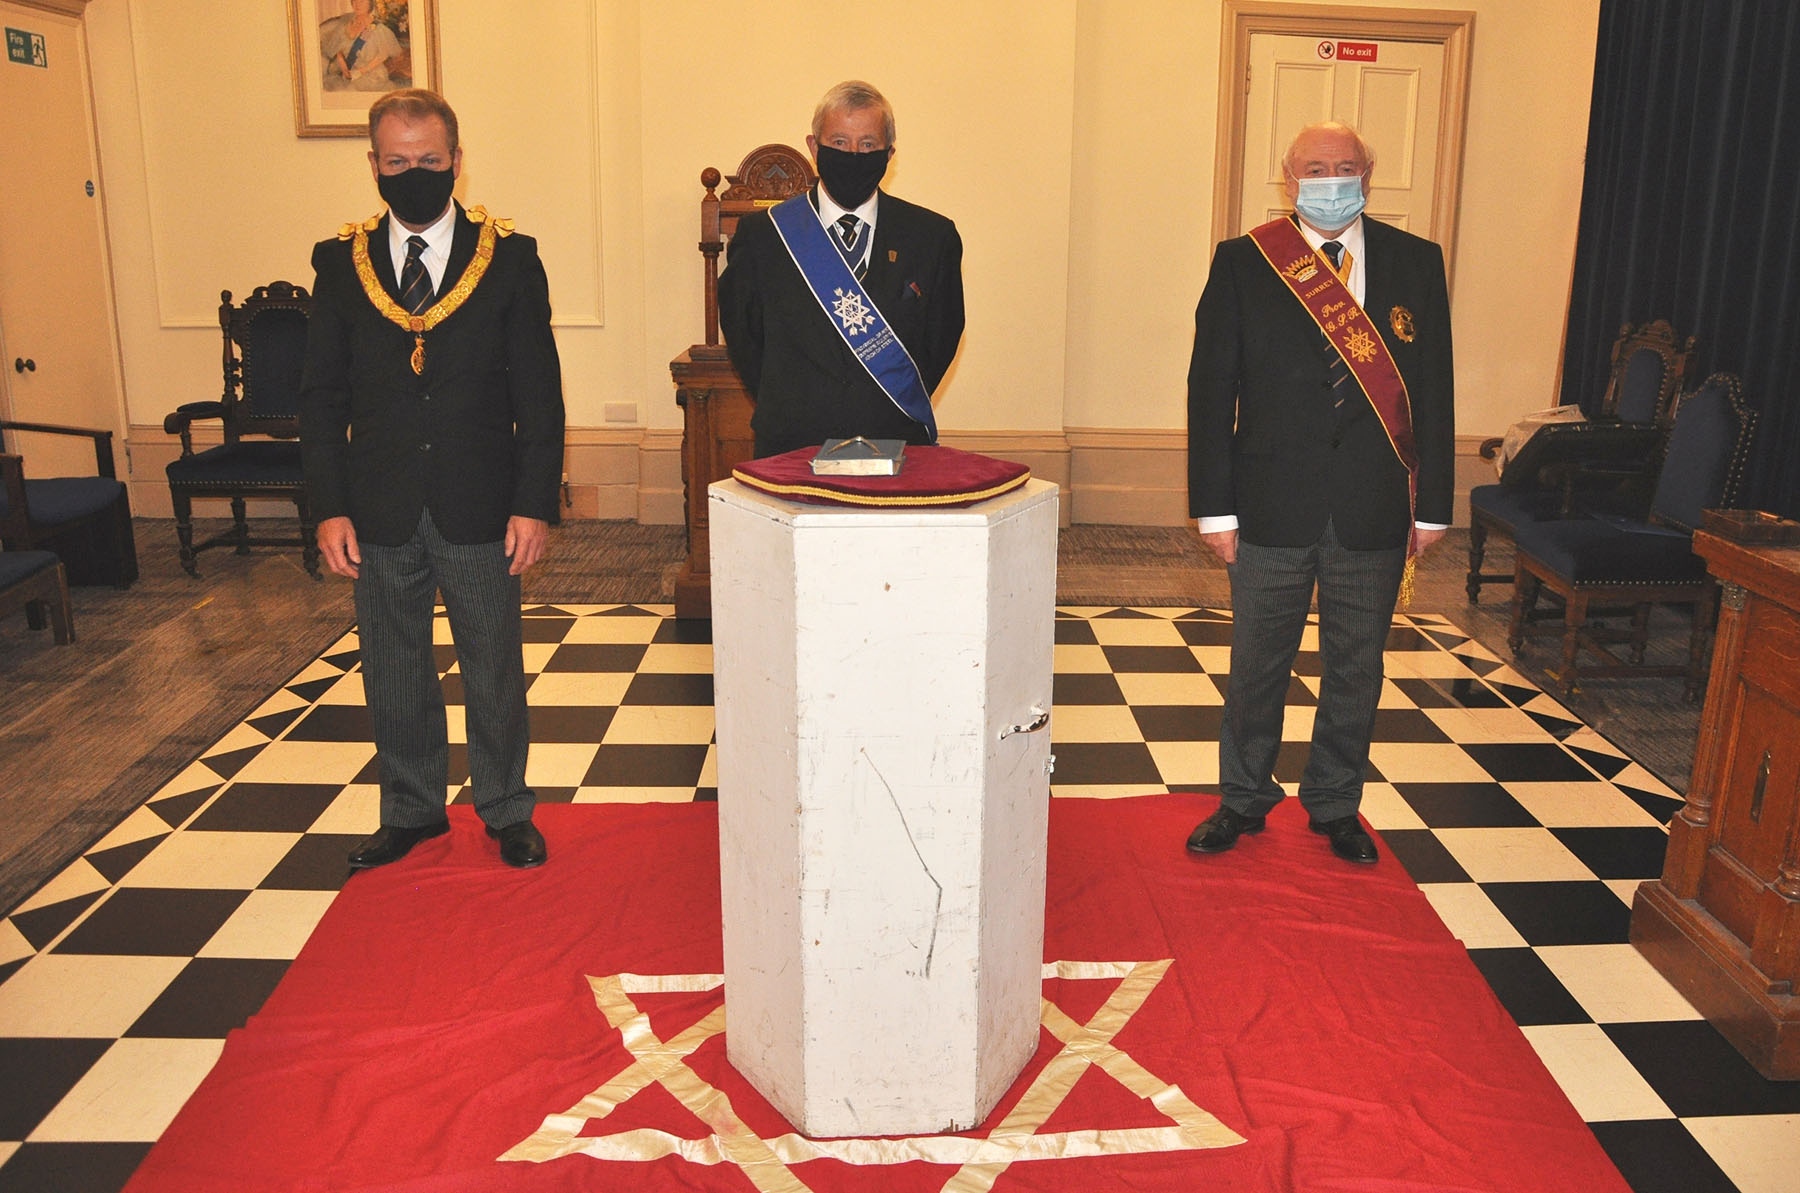 The Installation Meeting of Warlingham Conclave